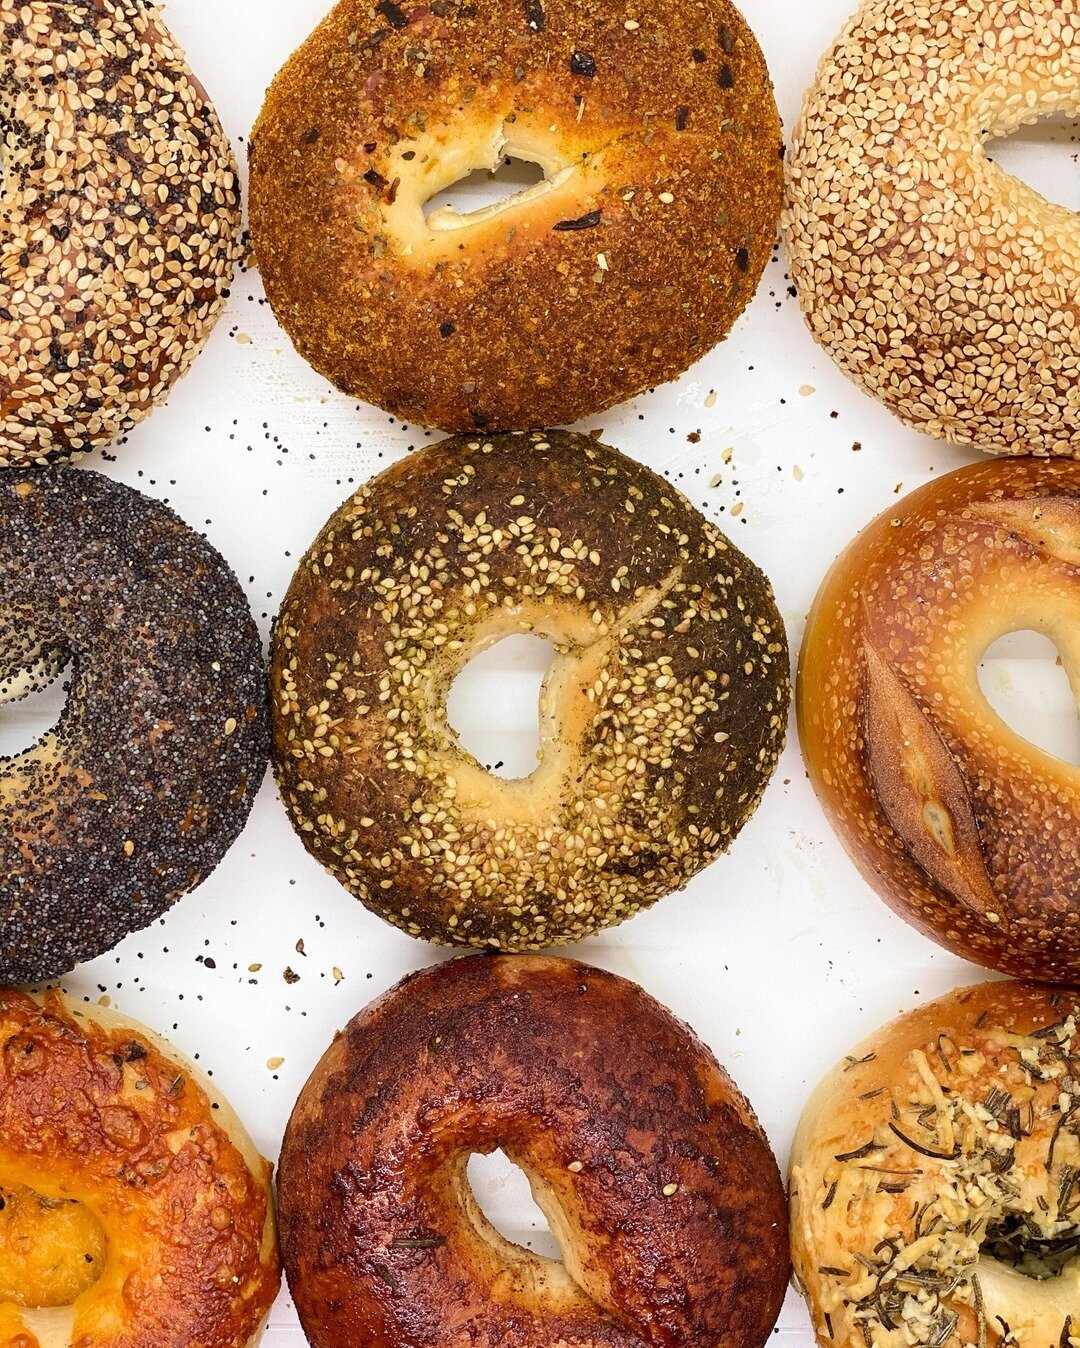 WHAT'S YOUR FAVORITE TYPE OF BAGEL? 🥯  The Buka Bagel is generously topped with seeds and seasonings to satisfy the strongest of cravings with the perfect combination of flavor, texture, and color. ⠀⠀⠀⠀⠀⠀⠀⠀⠀
.⠀⠀⠀⠀⠀⠀⠀⠀⠀
.⠀⠀⠀⠀⠀⠀⠀⠀⠀
. #foodiephotos⠀⠀⠀⠀